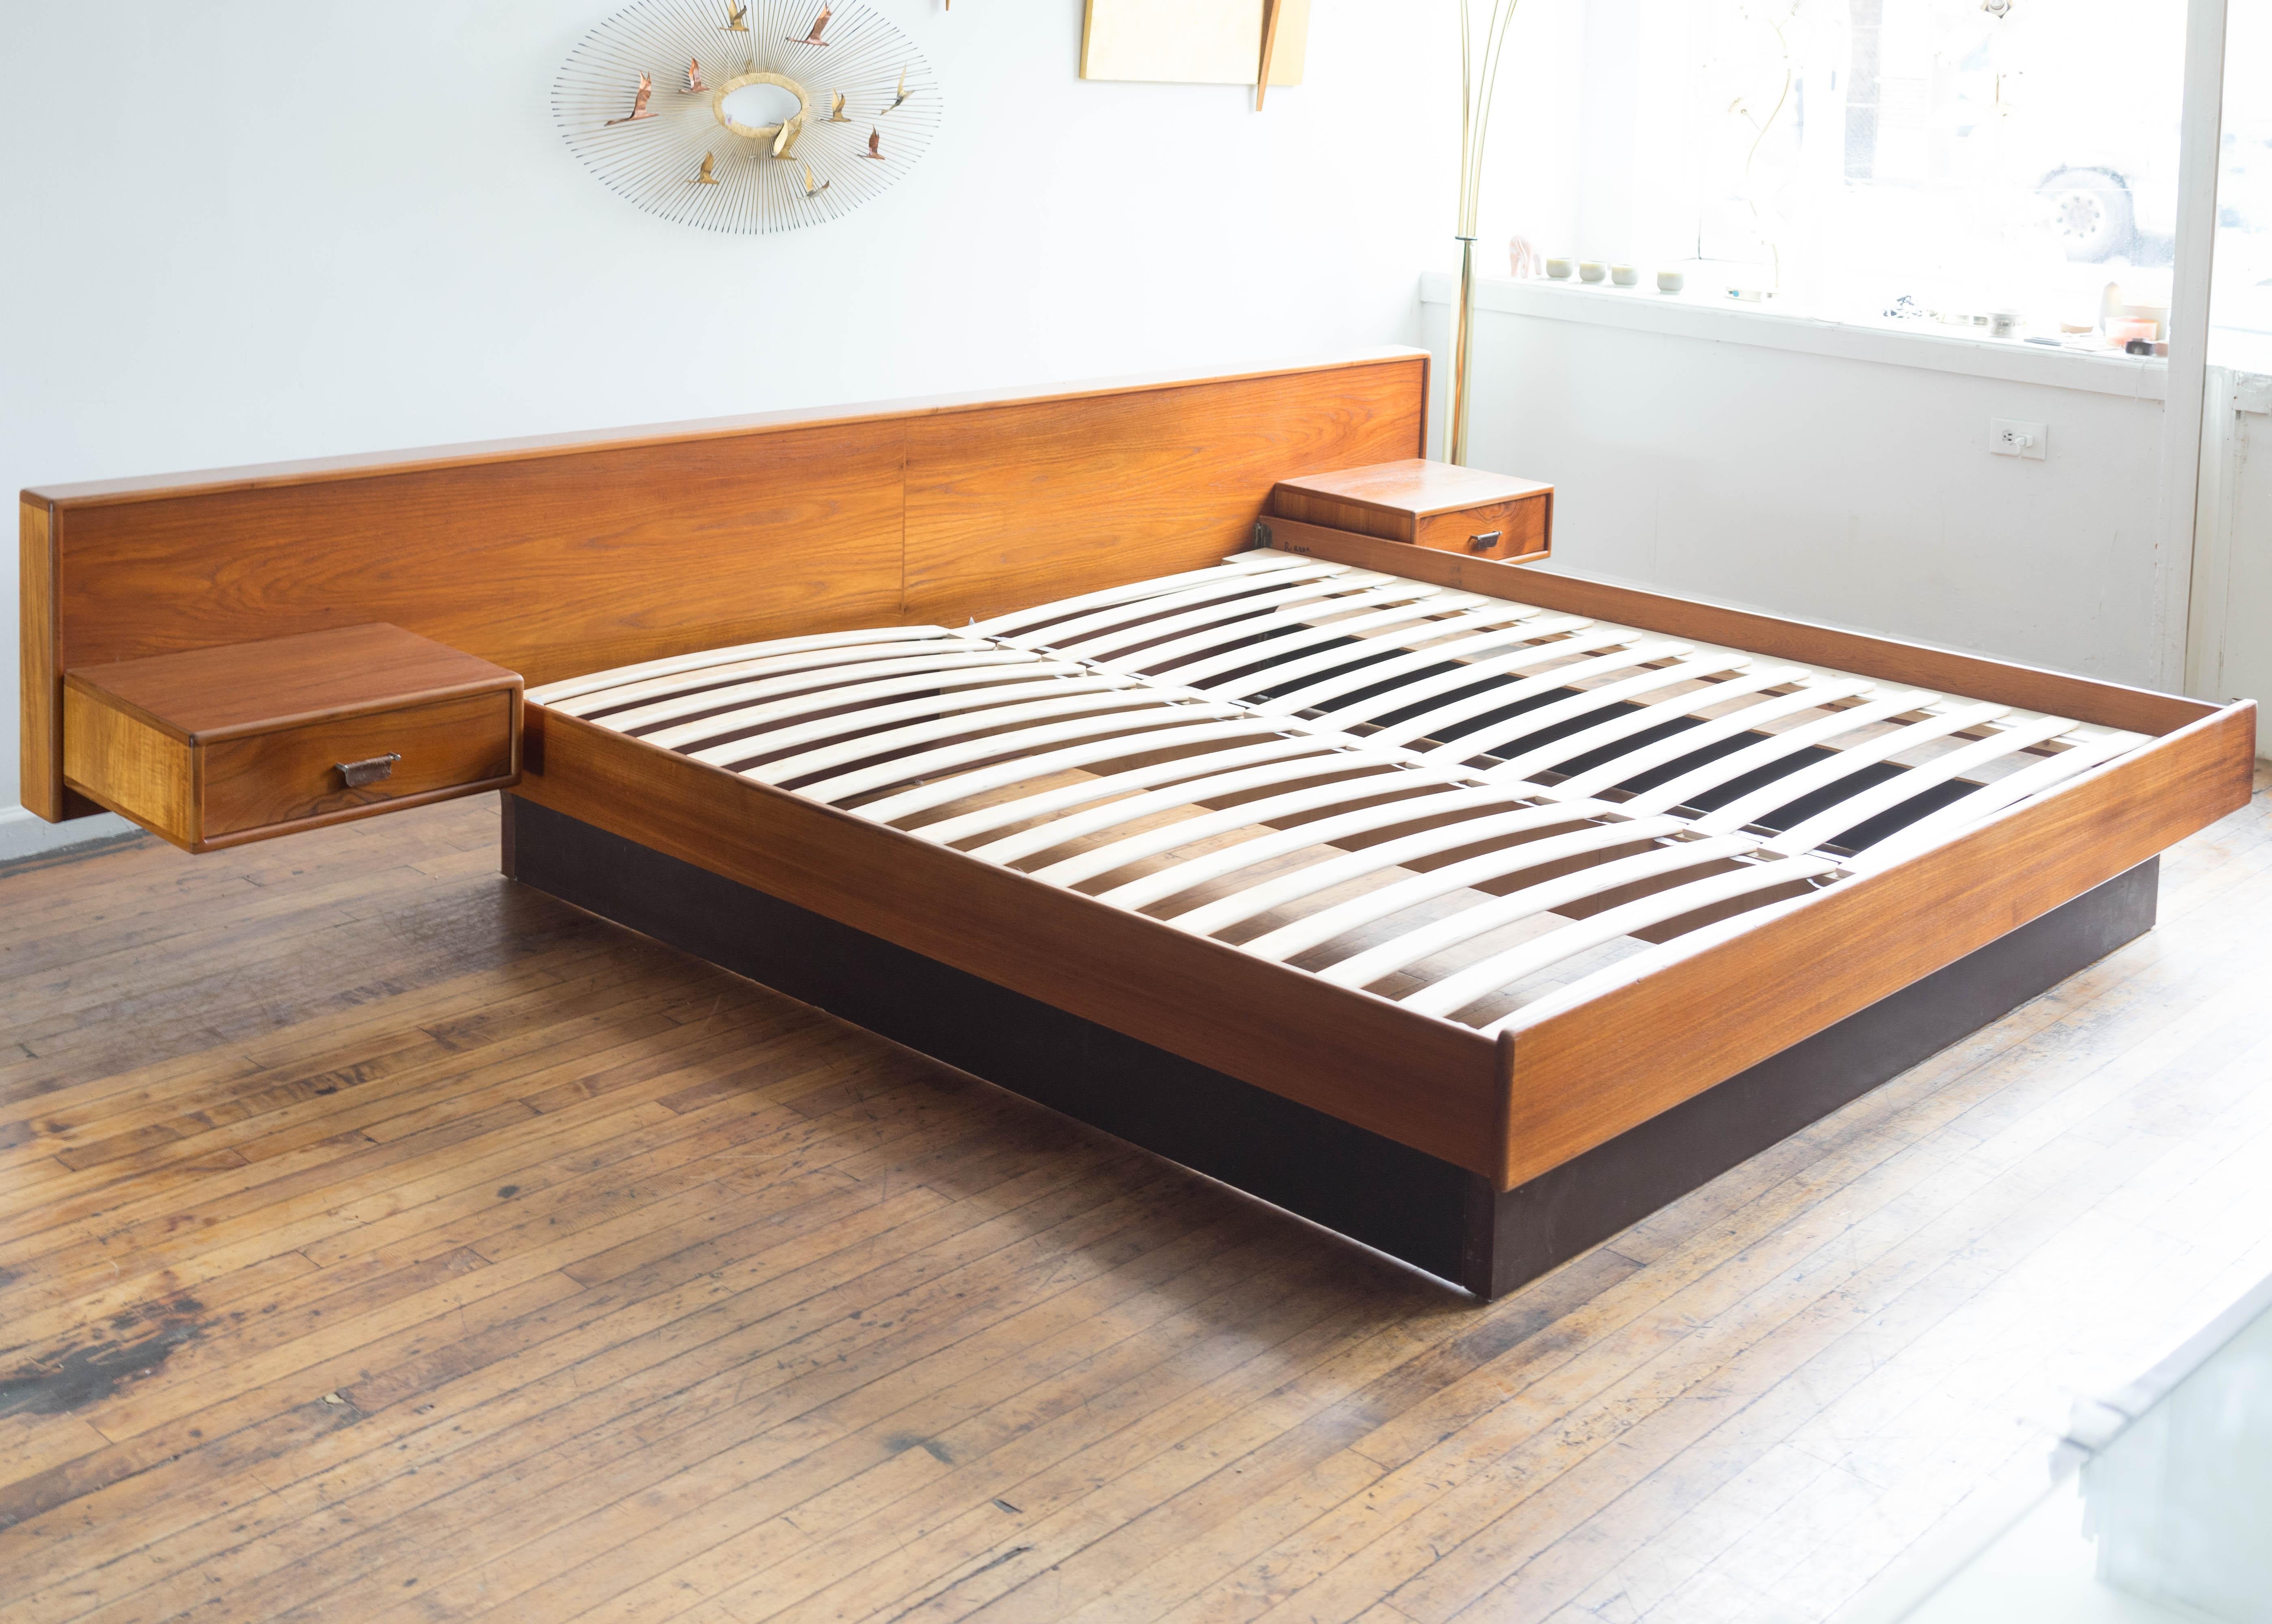 Gorgeous and dramatic king sized platform bed with floating nightstands made in Denmark. Features a headboard just over 10 feet wide and room for a modern king mattress. Two floating nightstands easily attach with a hidden cleat. Each nightstand has